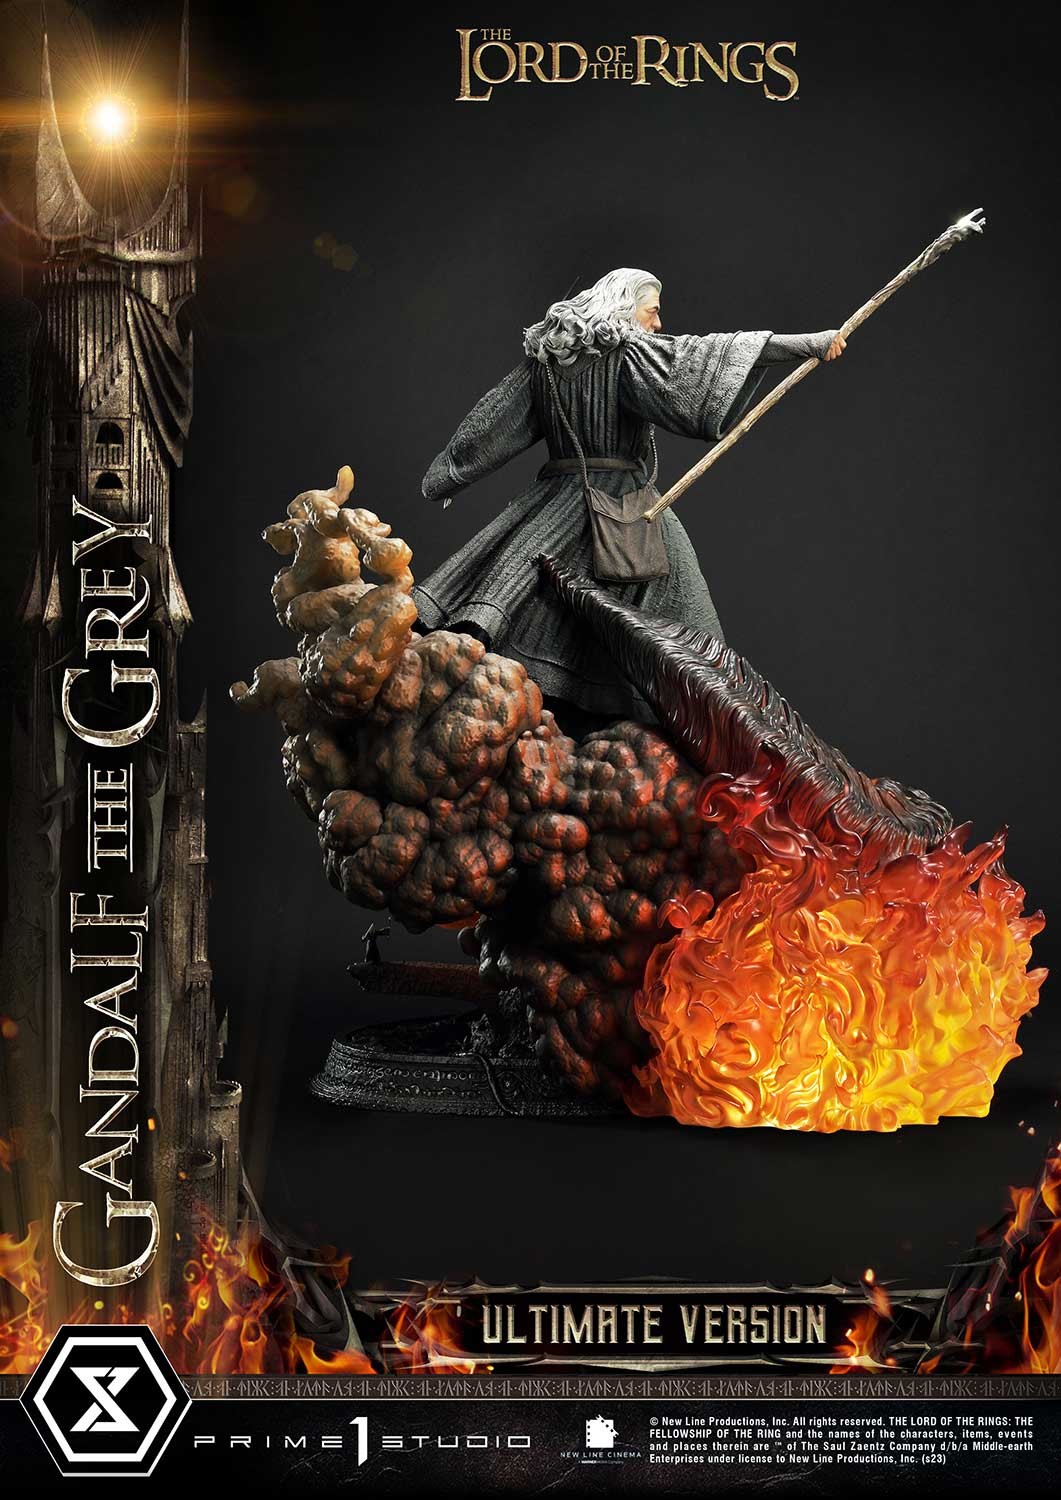 GANDALF THE GREY 1/4 Scale Statue Gandalf-the-grey-ultimate-version_the-lord-of-the-rings_gallery_64c425bb952e9